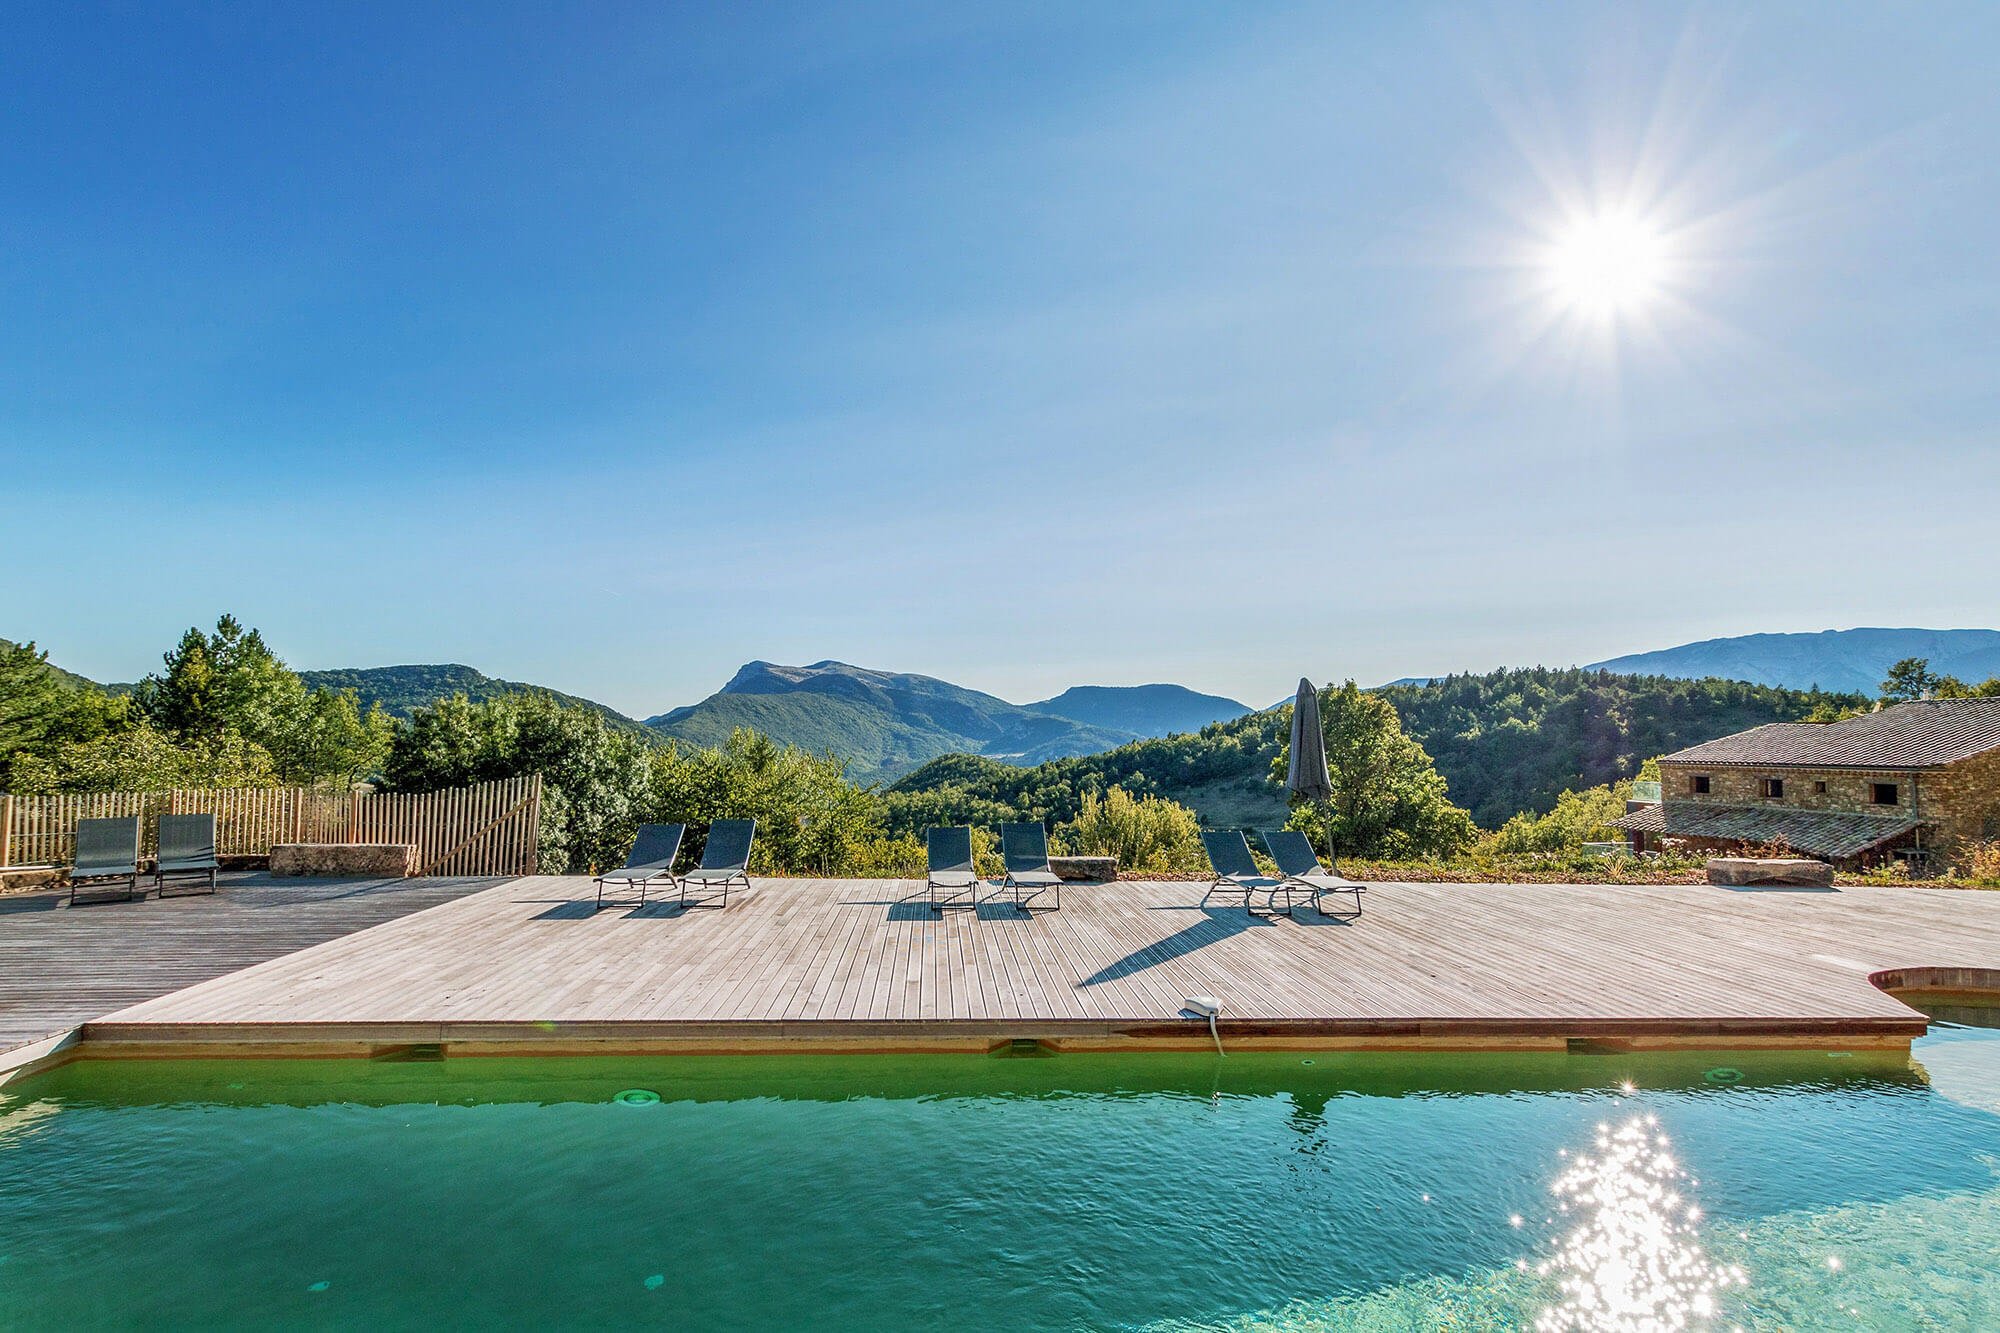 Luxury, eco-friendly domain to organize your seminar in Drôme provençale in the South of France